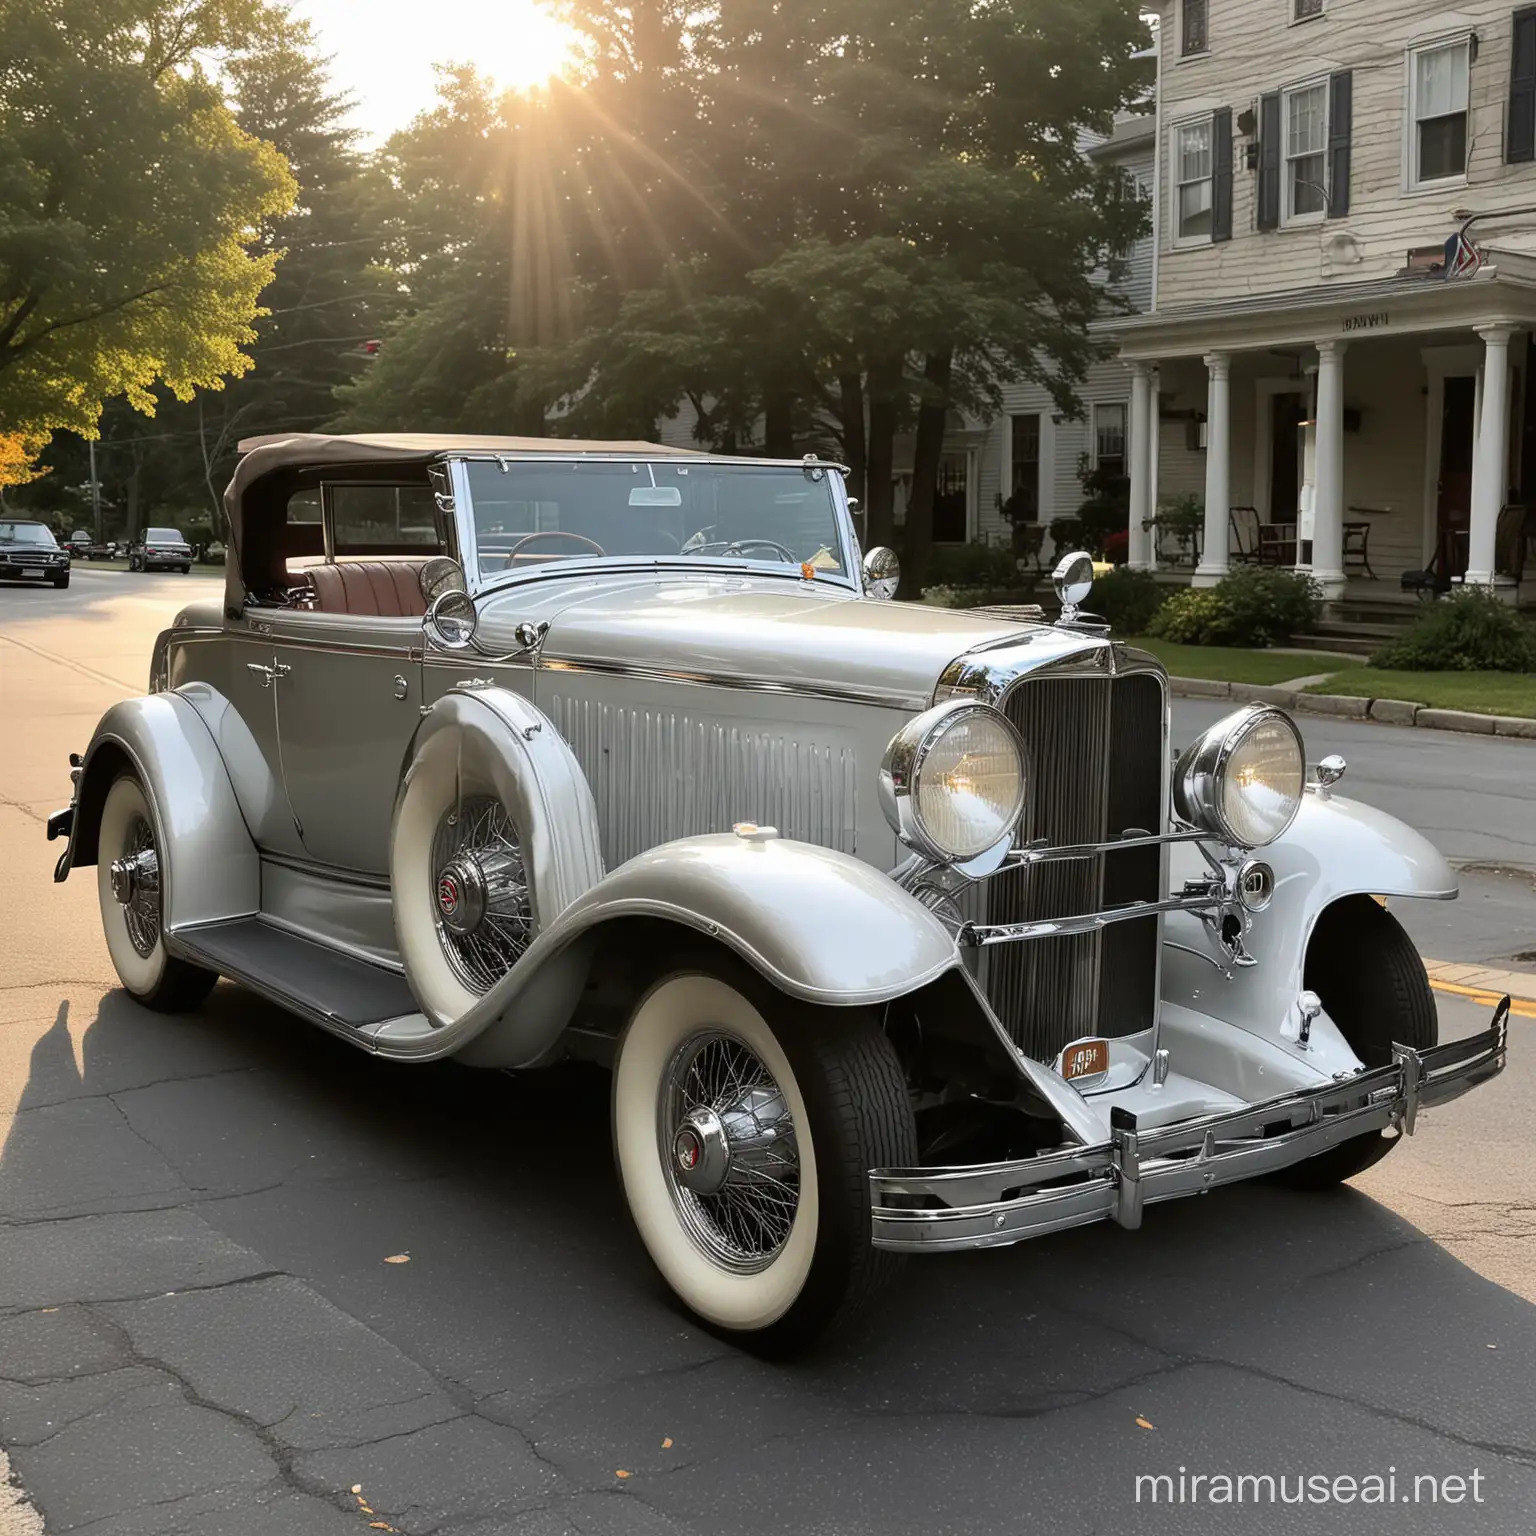 1932 Lincoln KB Convertible Parked in Montpelier Vermont Evening